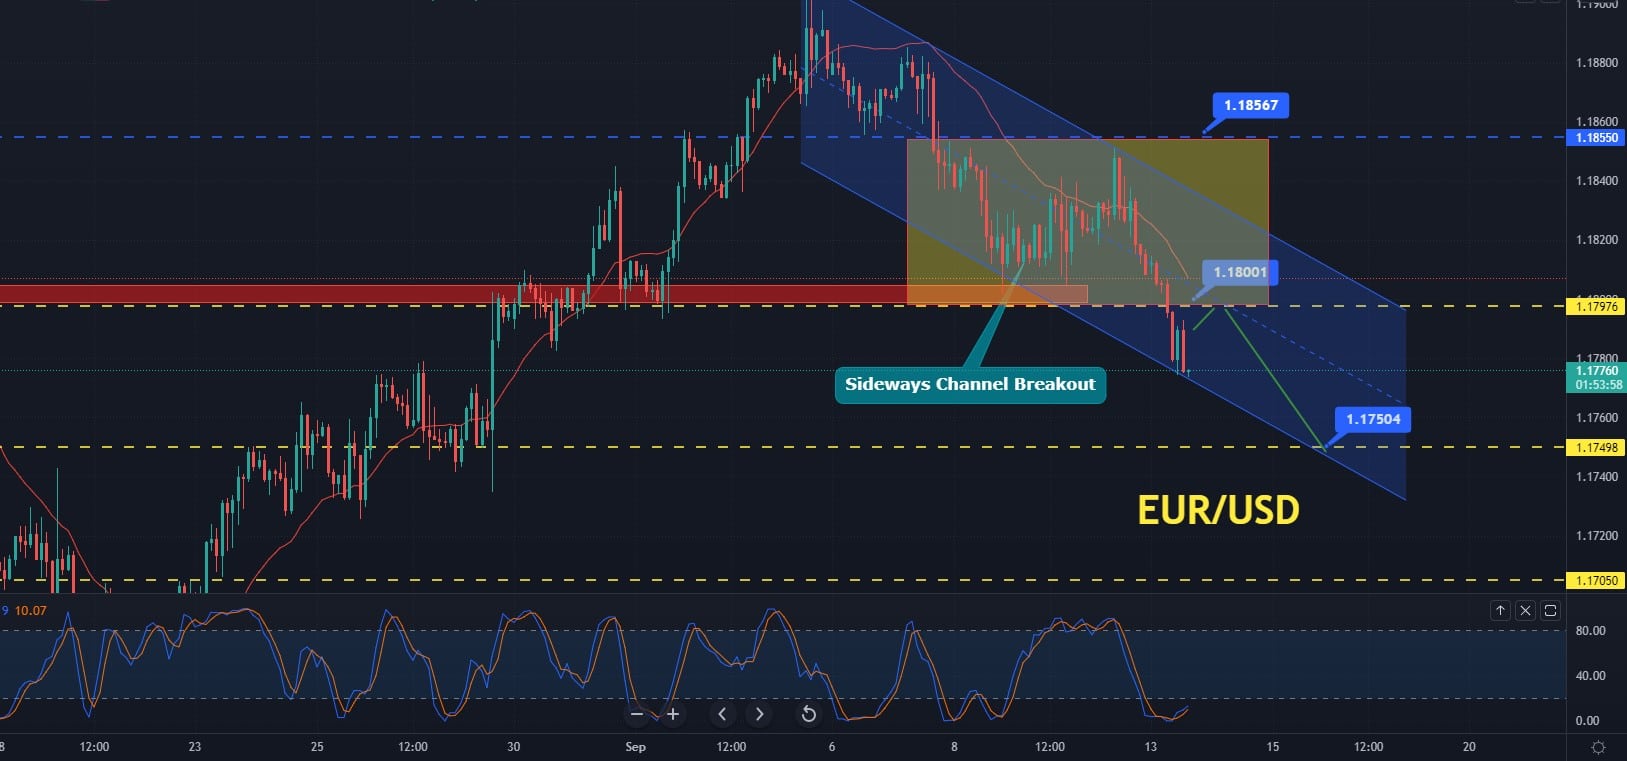 Eur usd action forex signal adams express company history